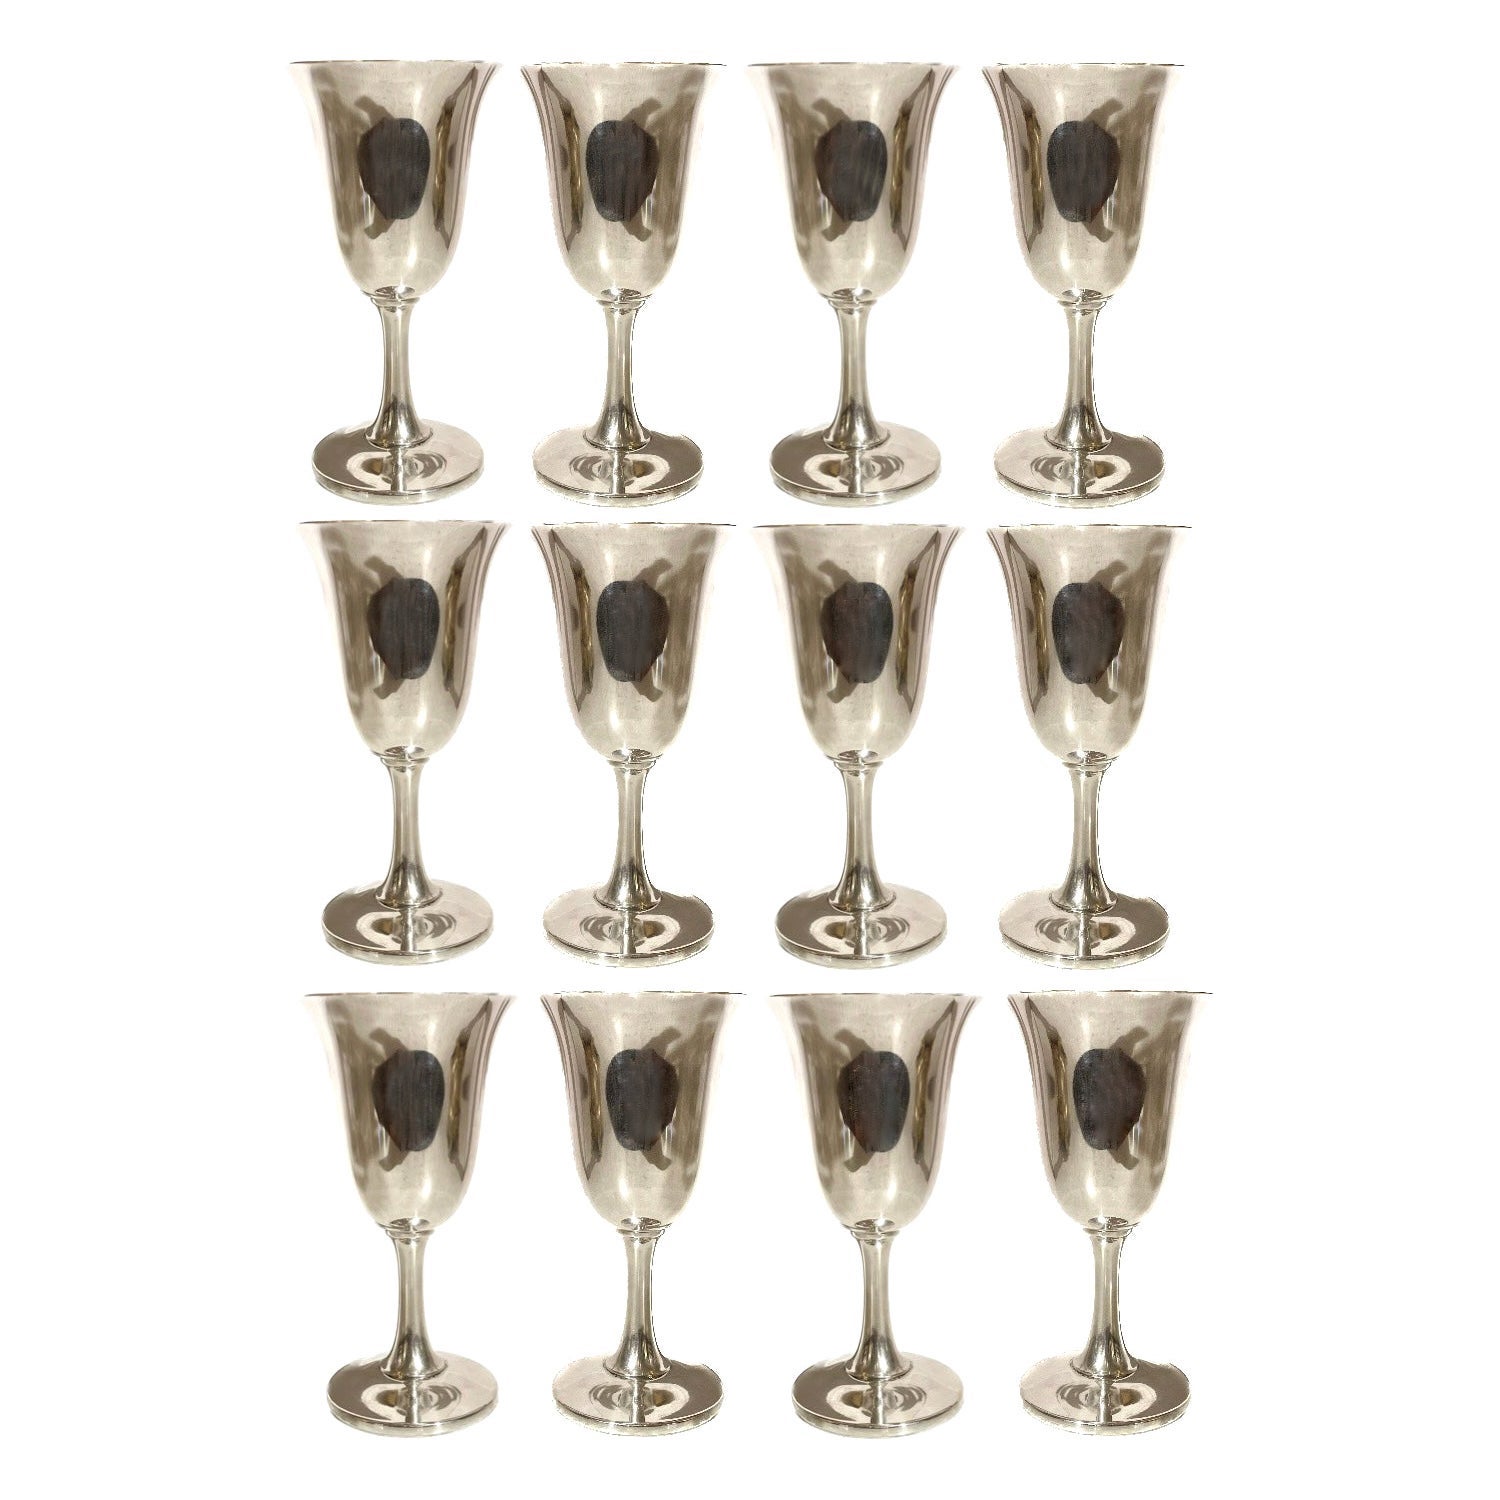 Set of 12 Antique American Sterling Silver Goblets Signed "Wallace" Circa 1900.